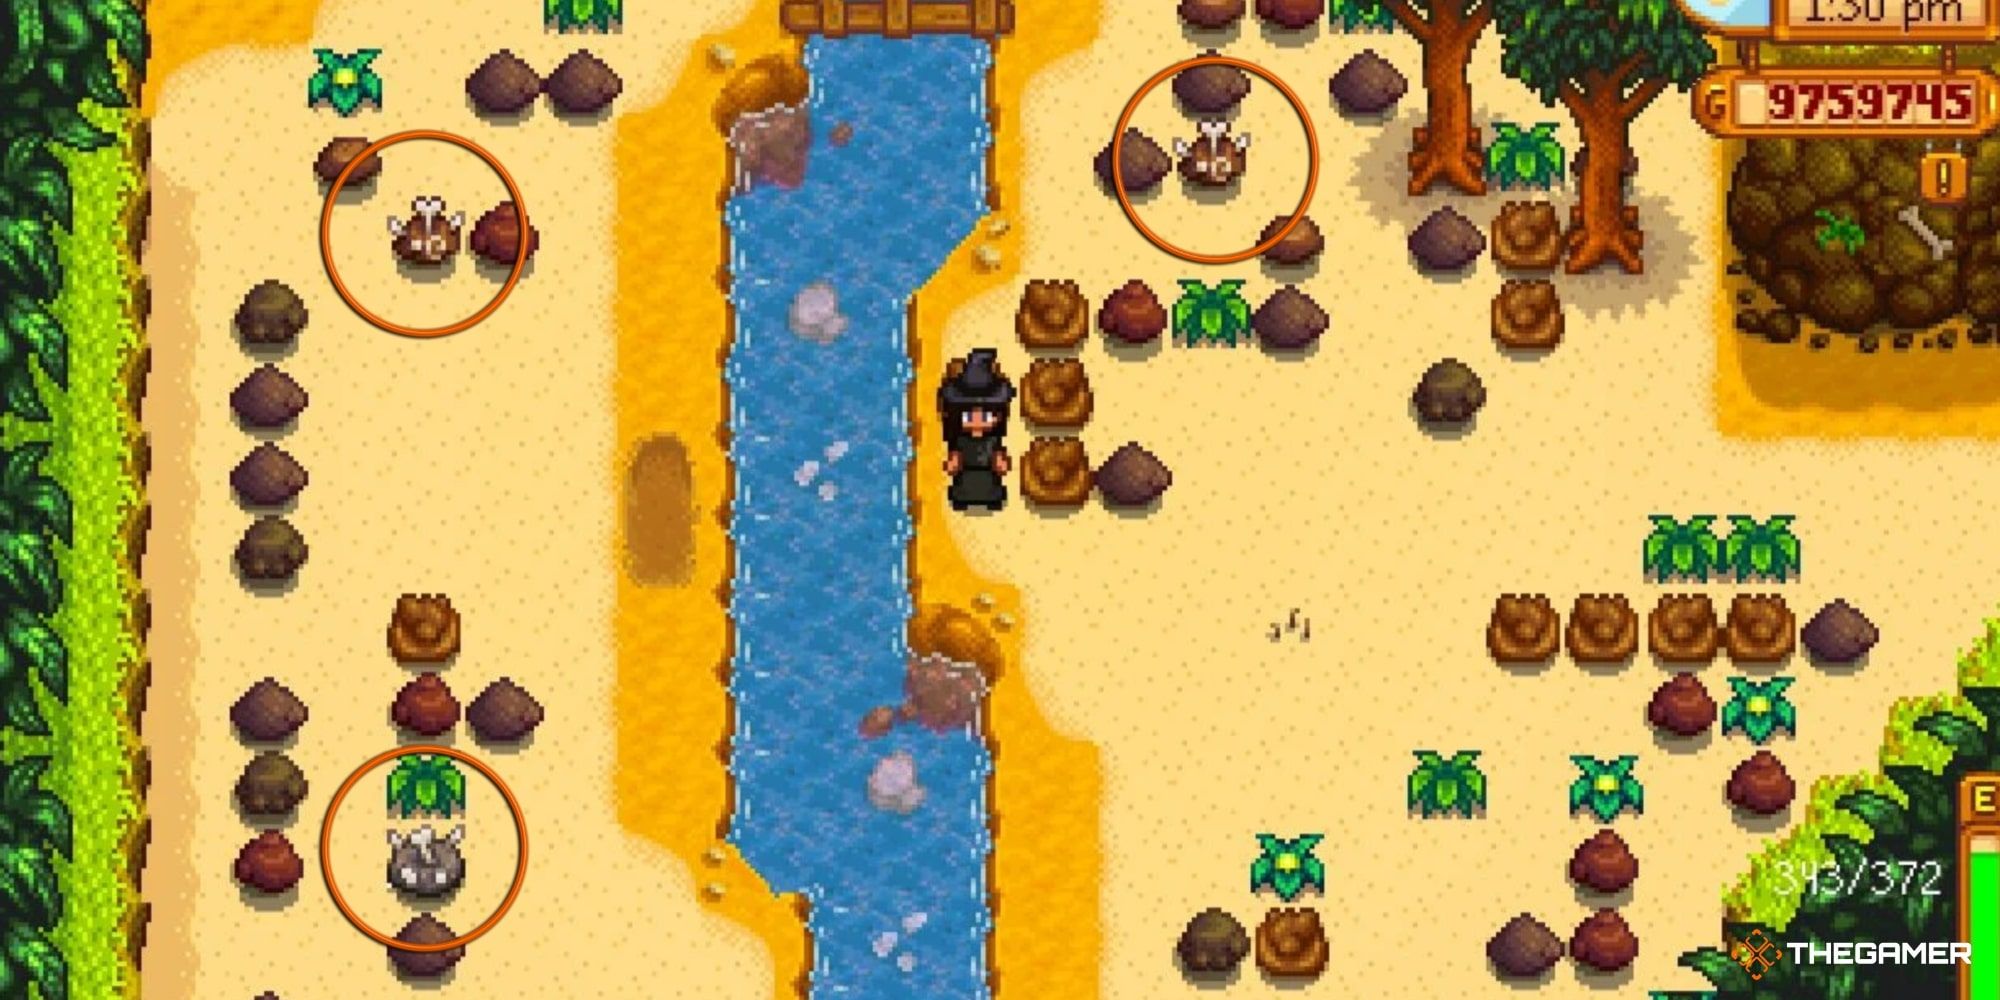 Complete Guide To Ginger Island In Stardew Valley